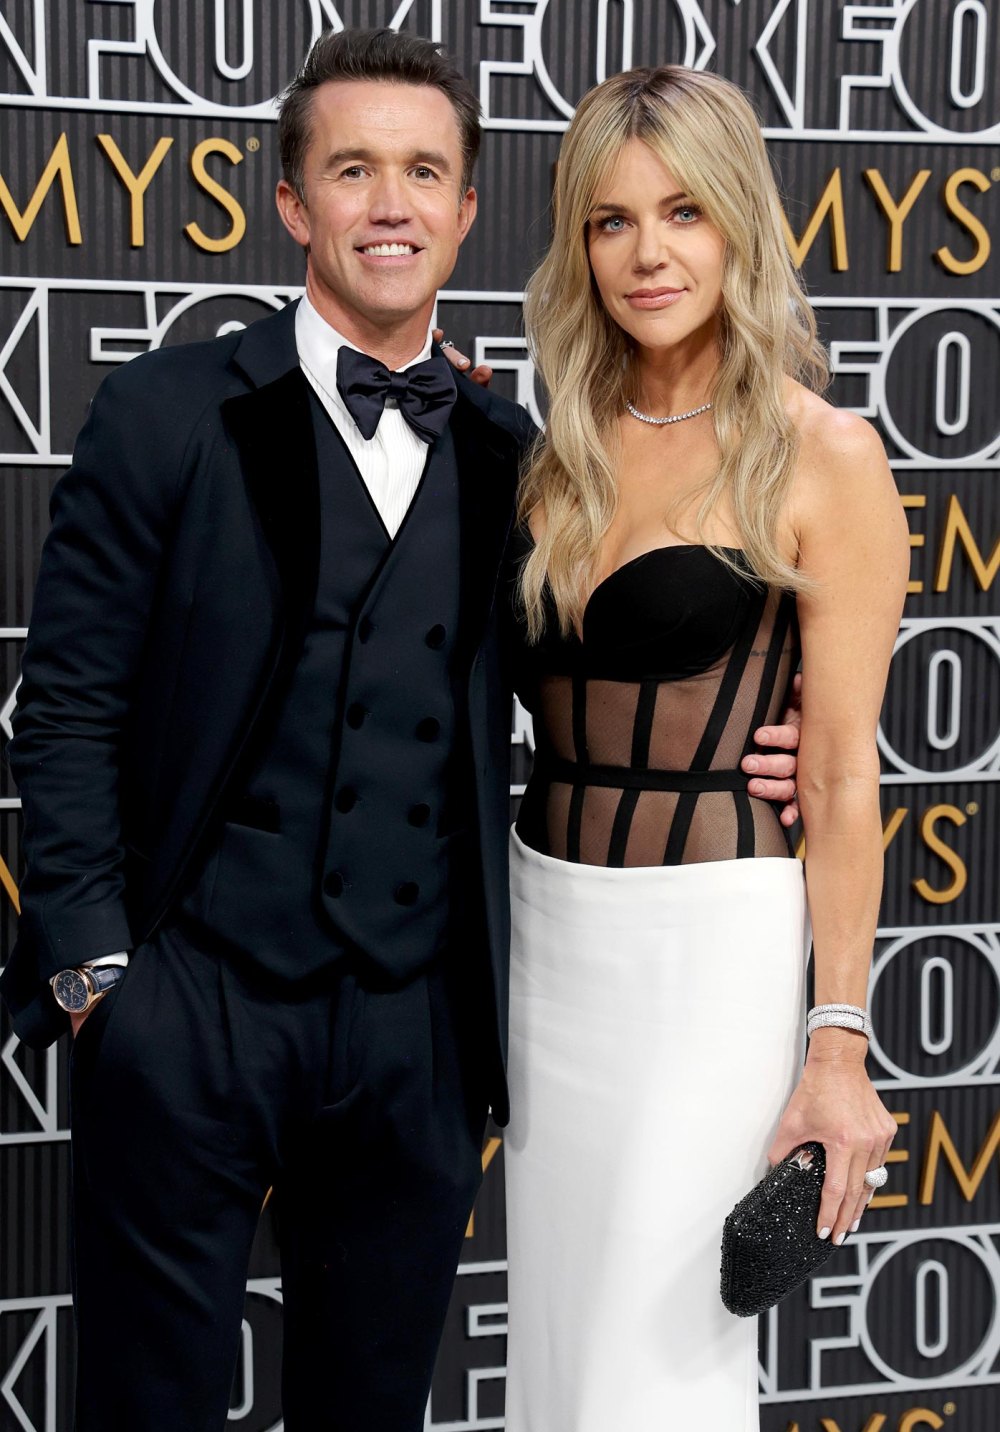 Rob McElhenney and Wife Kaitlin Olson Attend the Emmy Awards After Welcome to Wrexham Wins 645